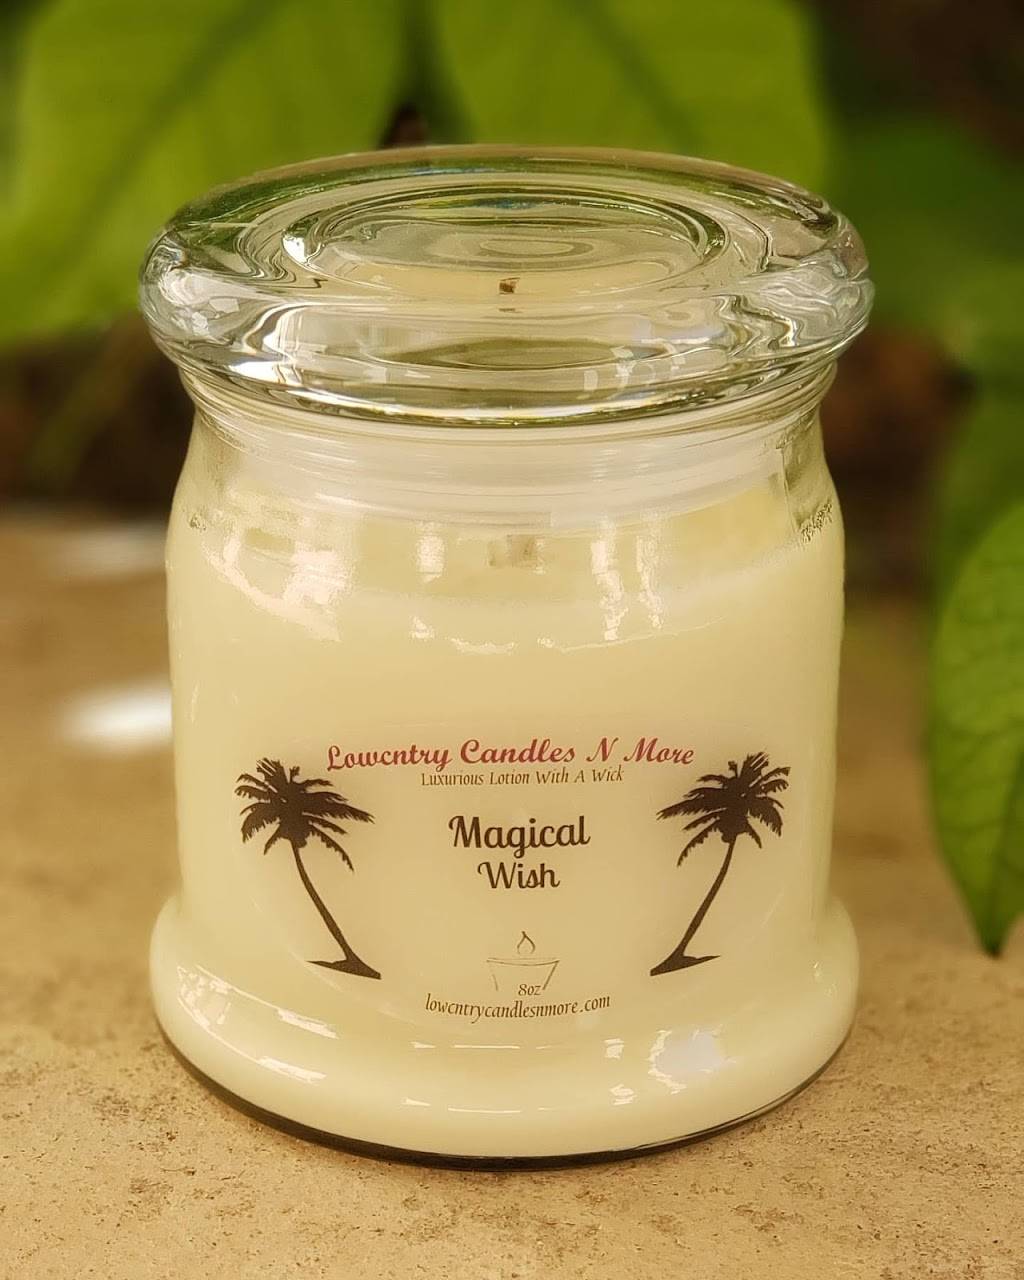 Lowcntry Candles N More | North Las Vegas, NV 89031, USA | Phone: (843) 714-9918